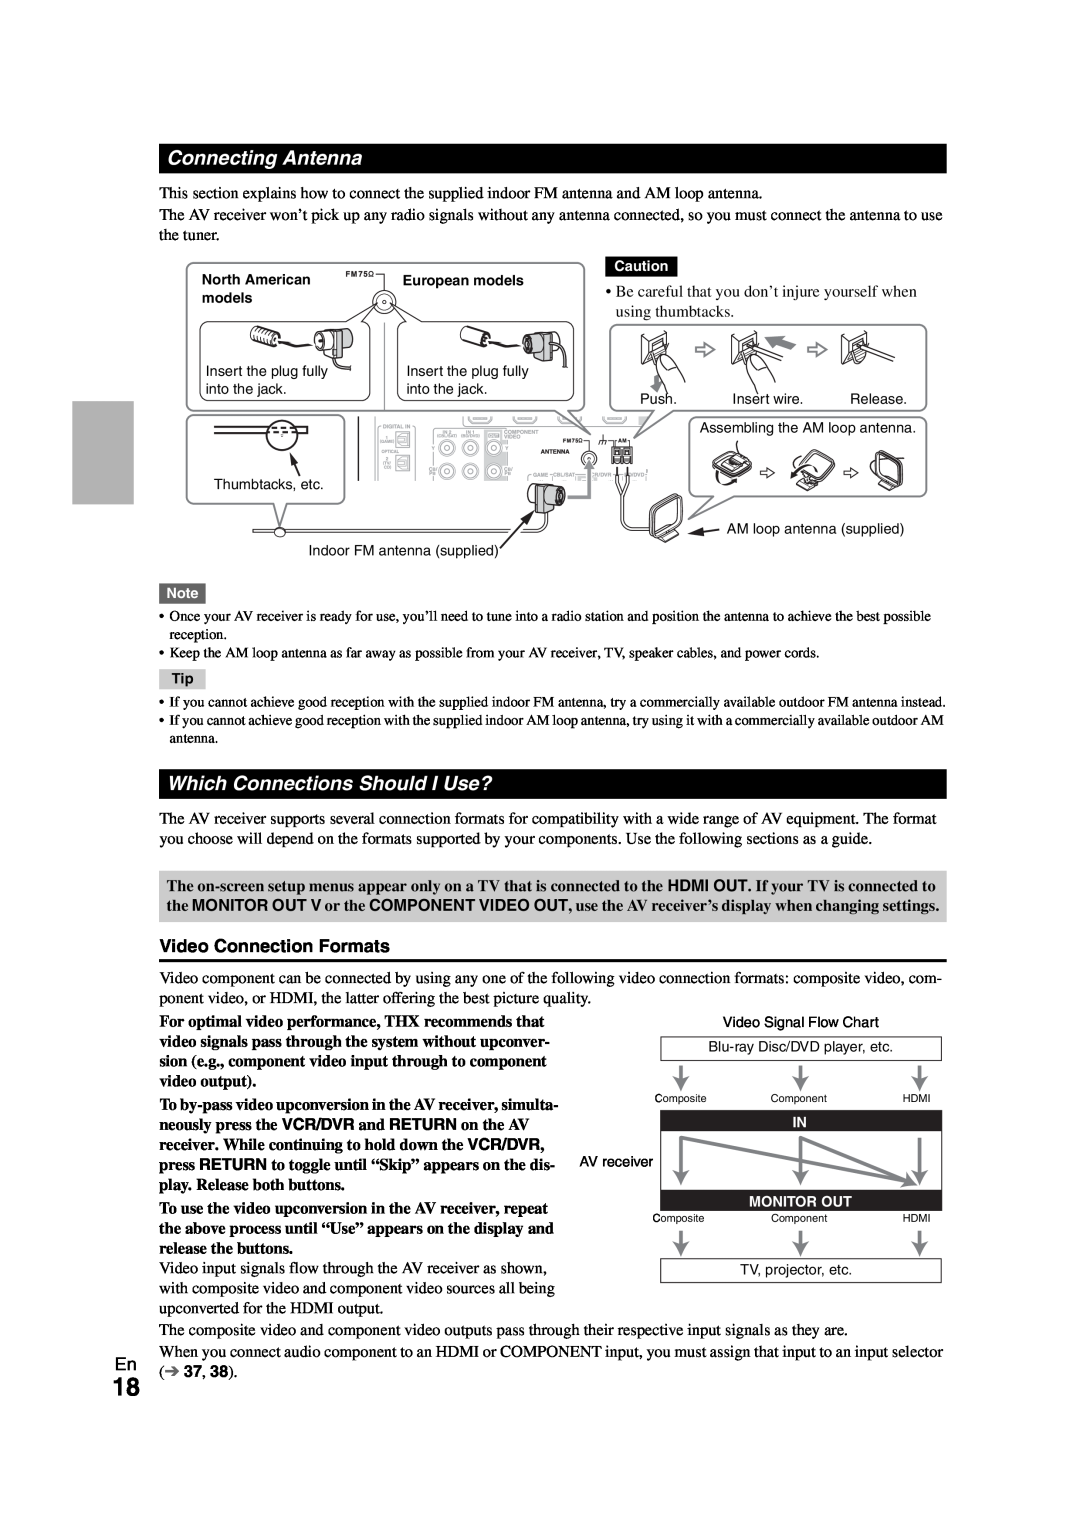 Onkyo HT-R980 instruction manual Connecting Antenna, Which Connections Should I Use?, Video Connection Formats 